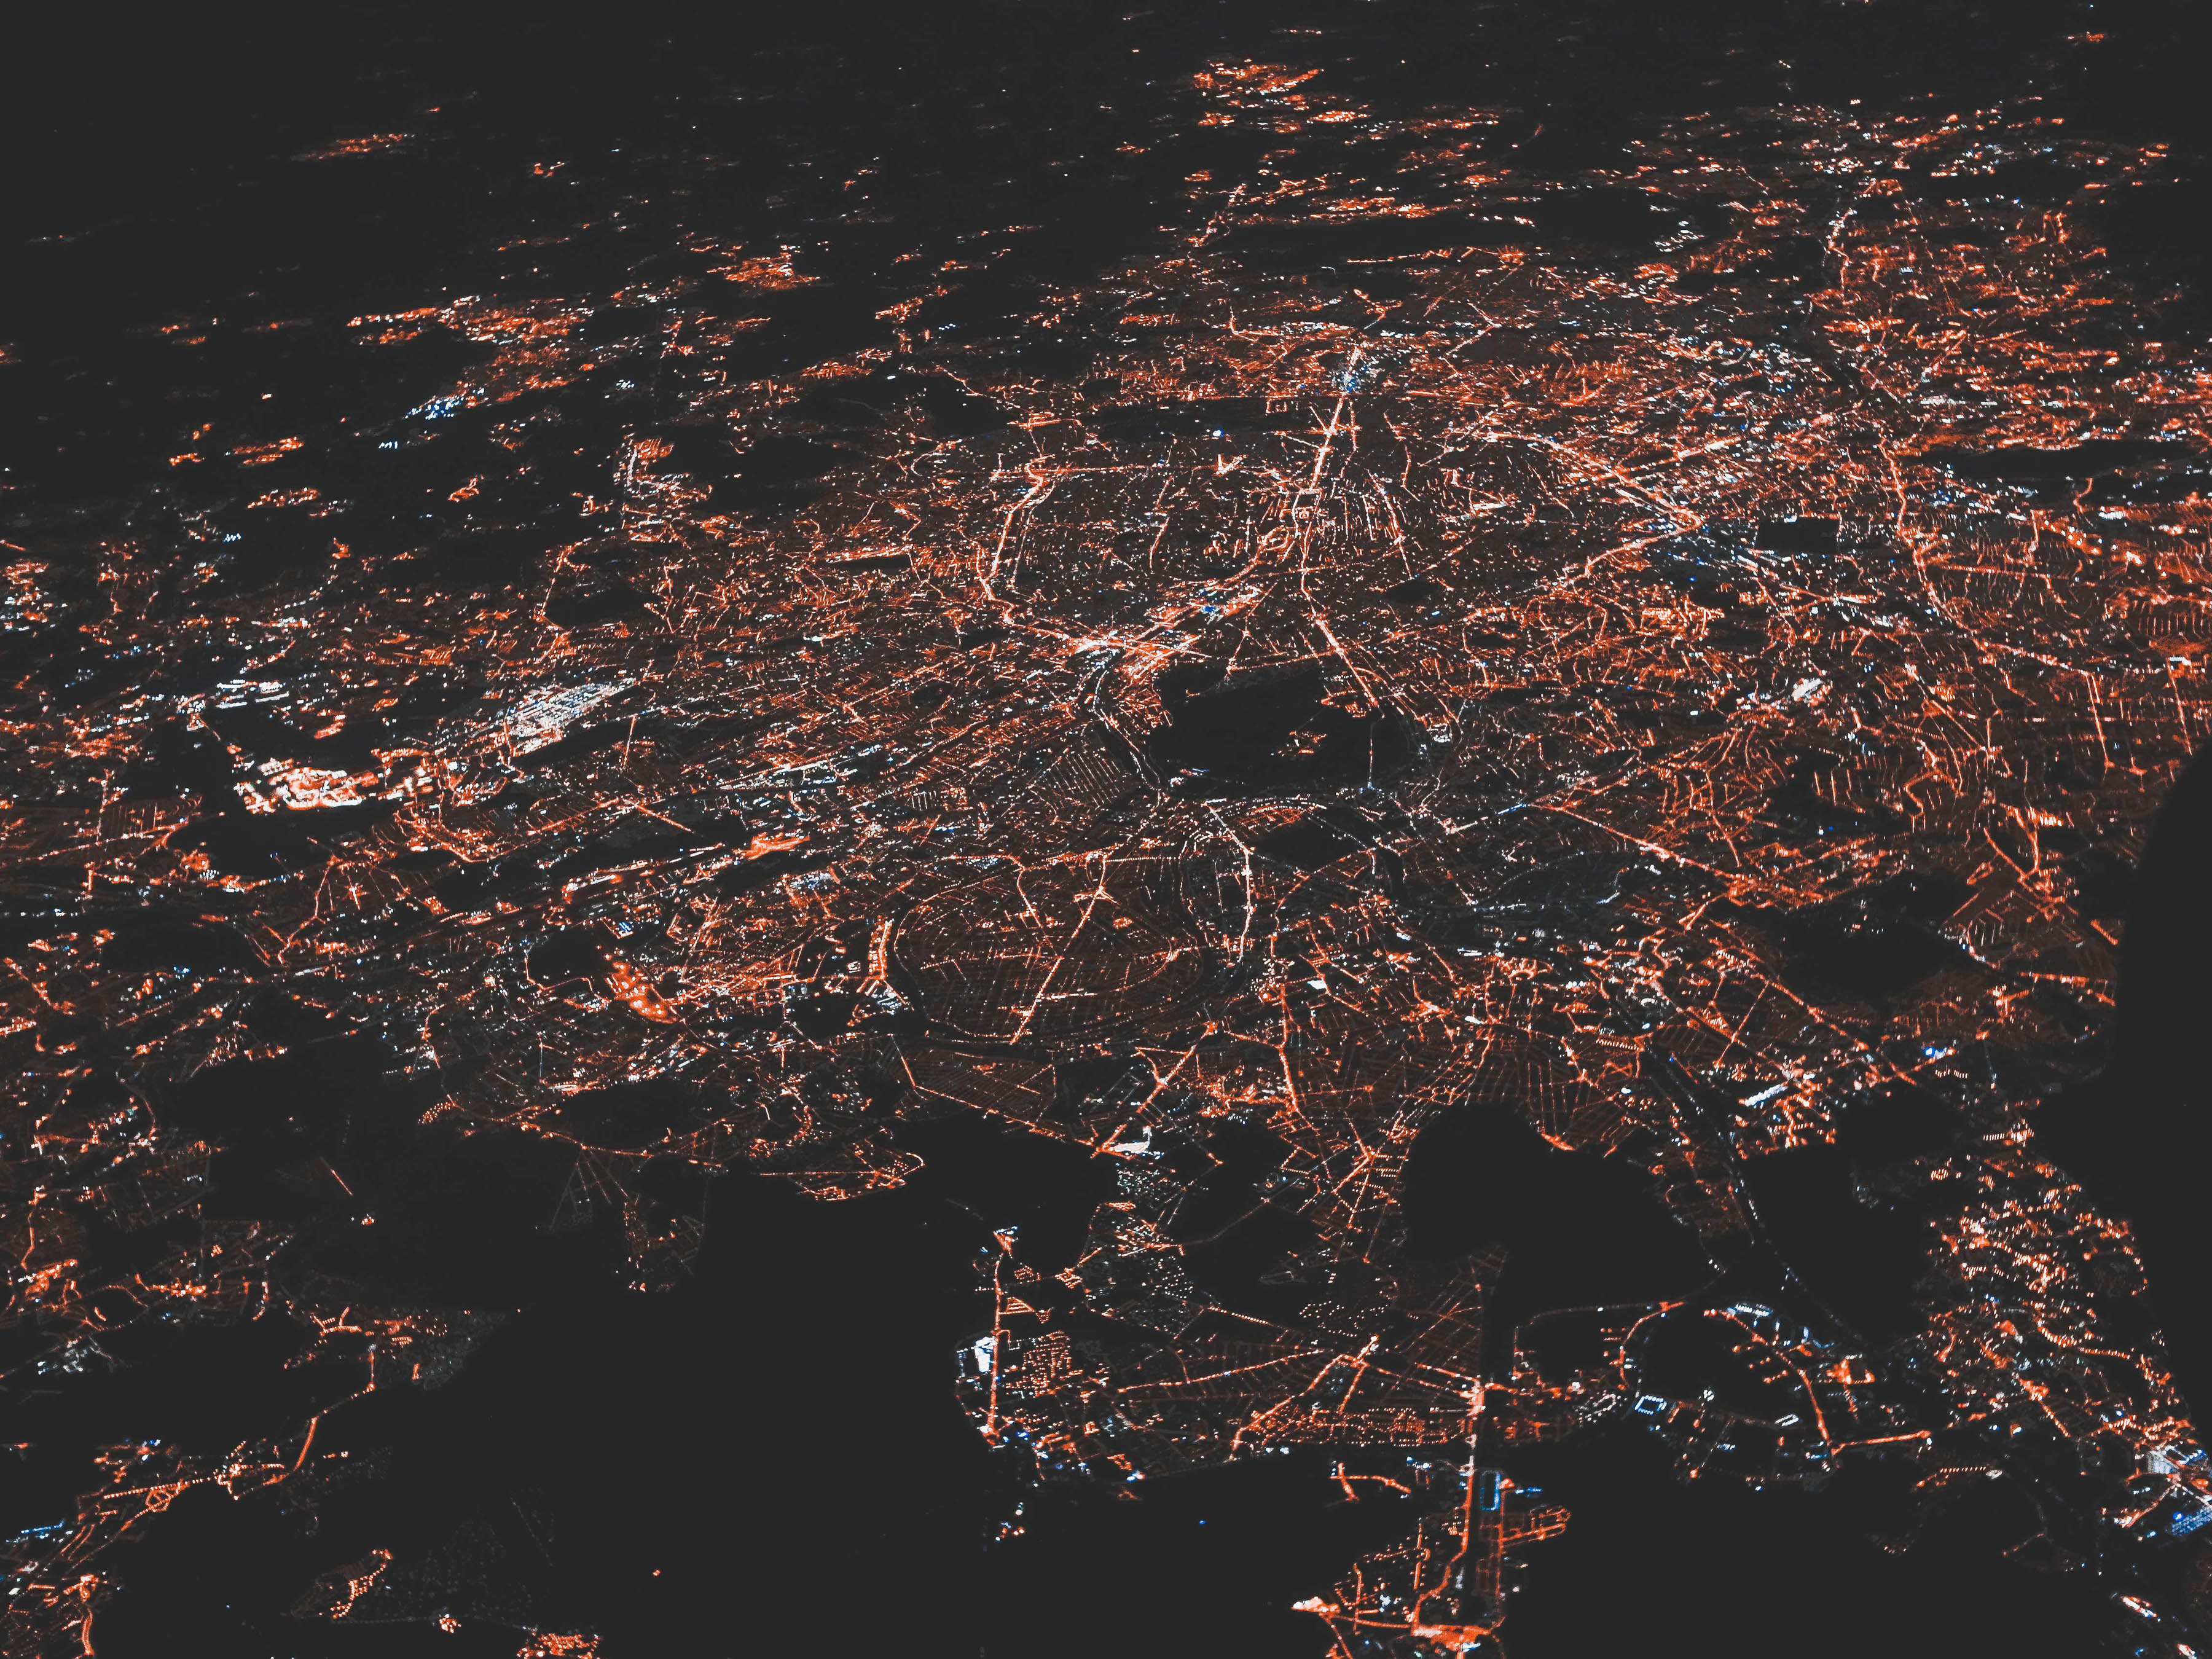 A look at city lights from outer space